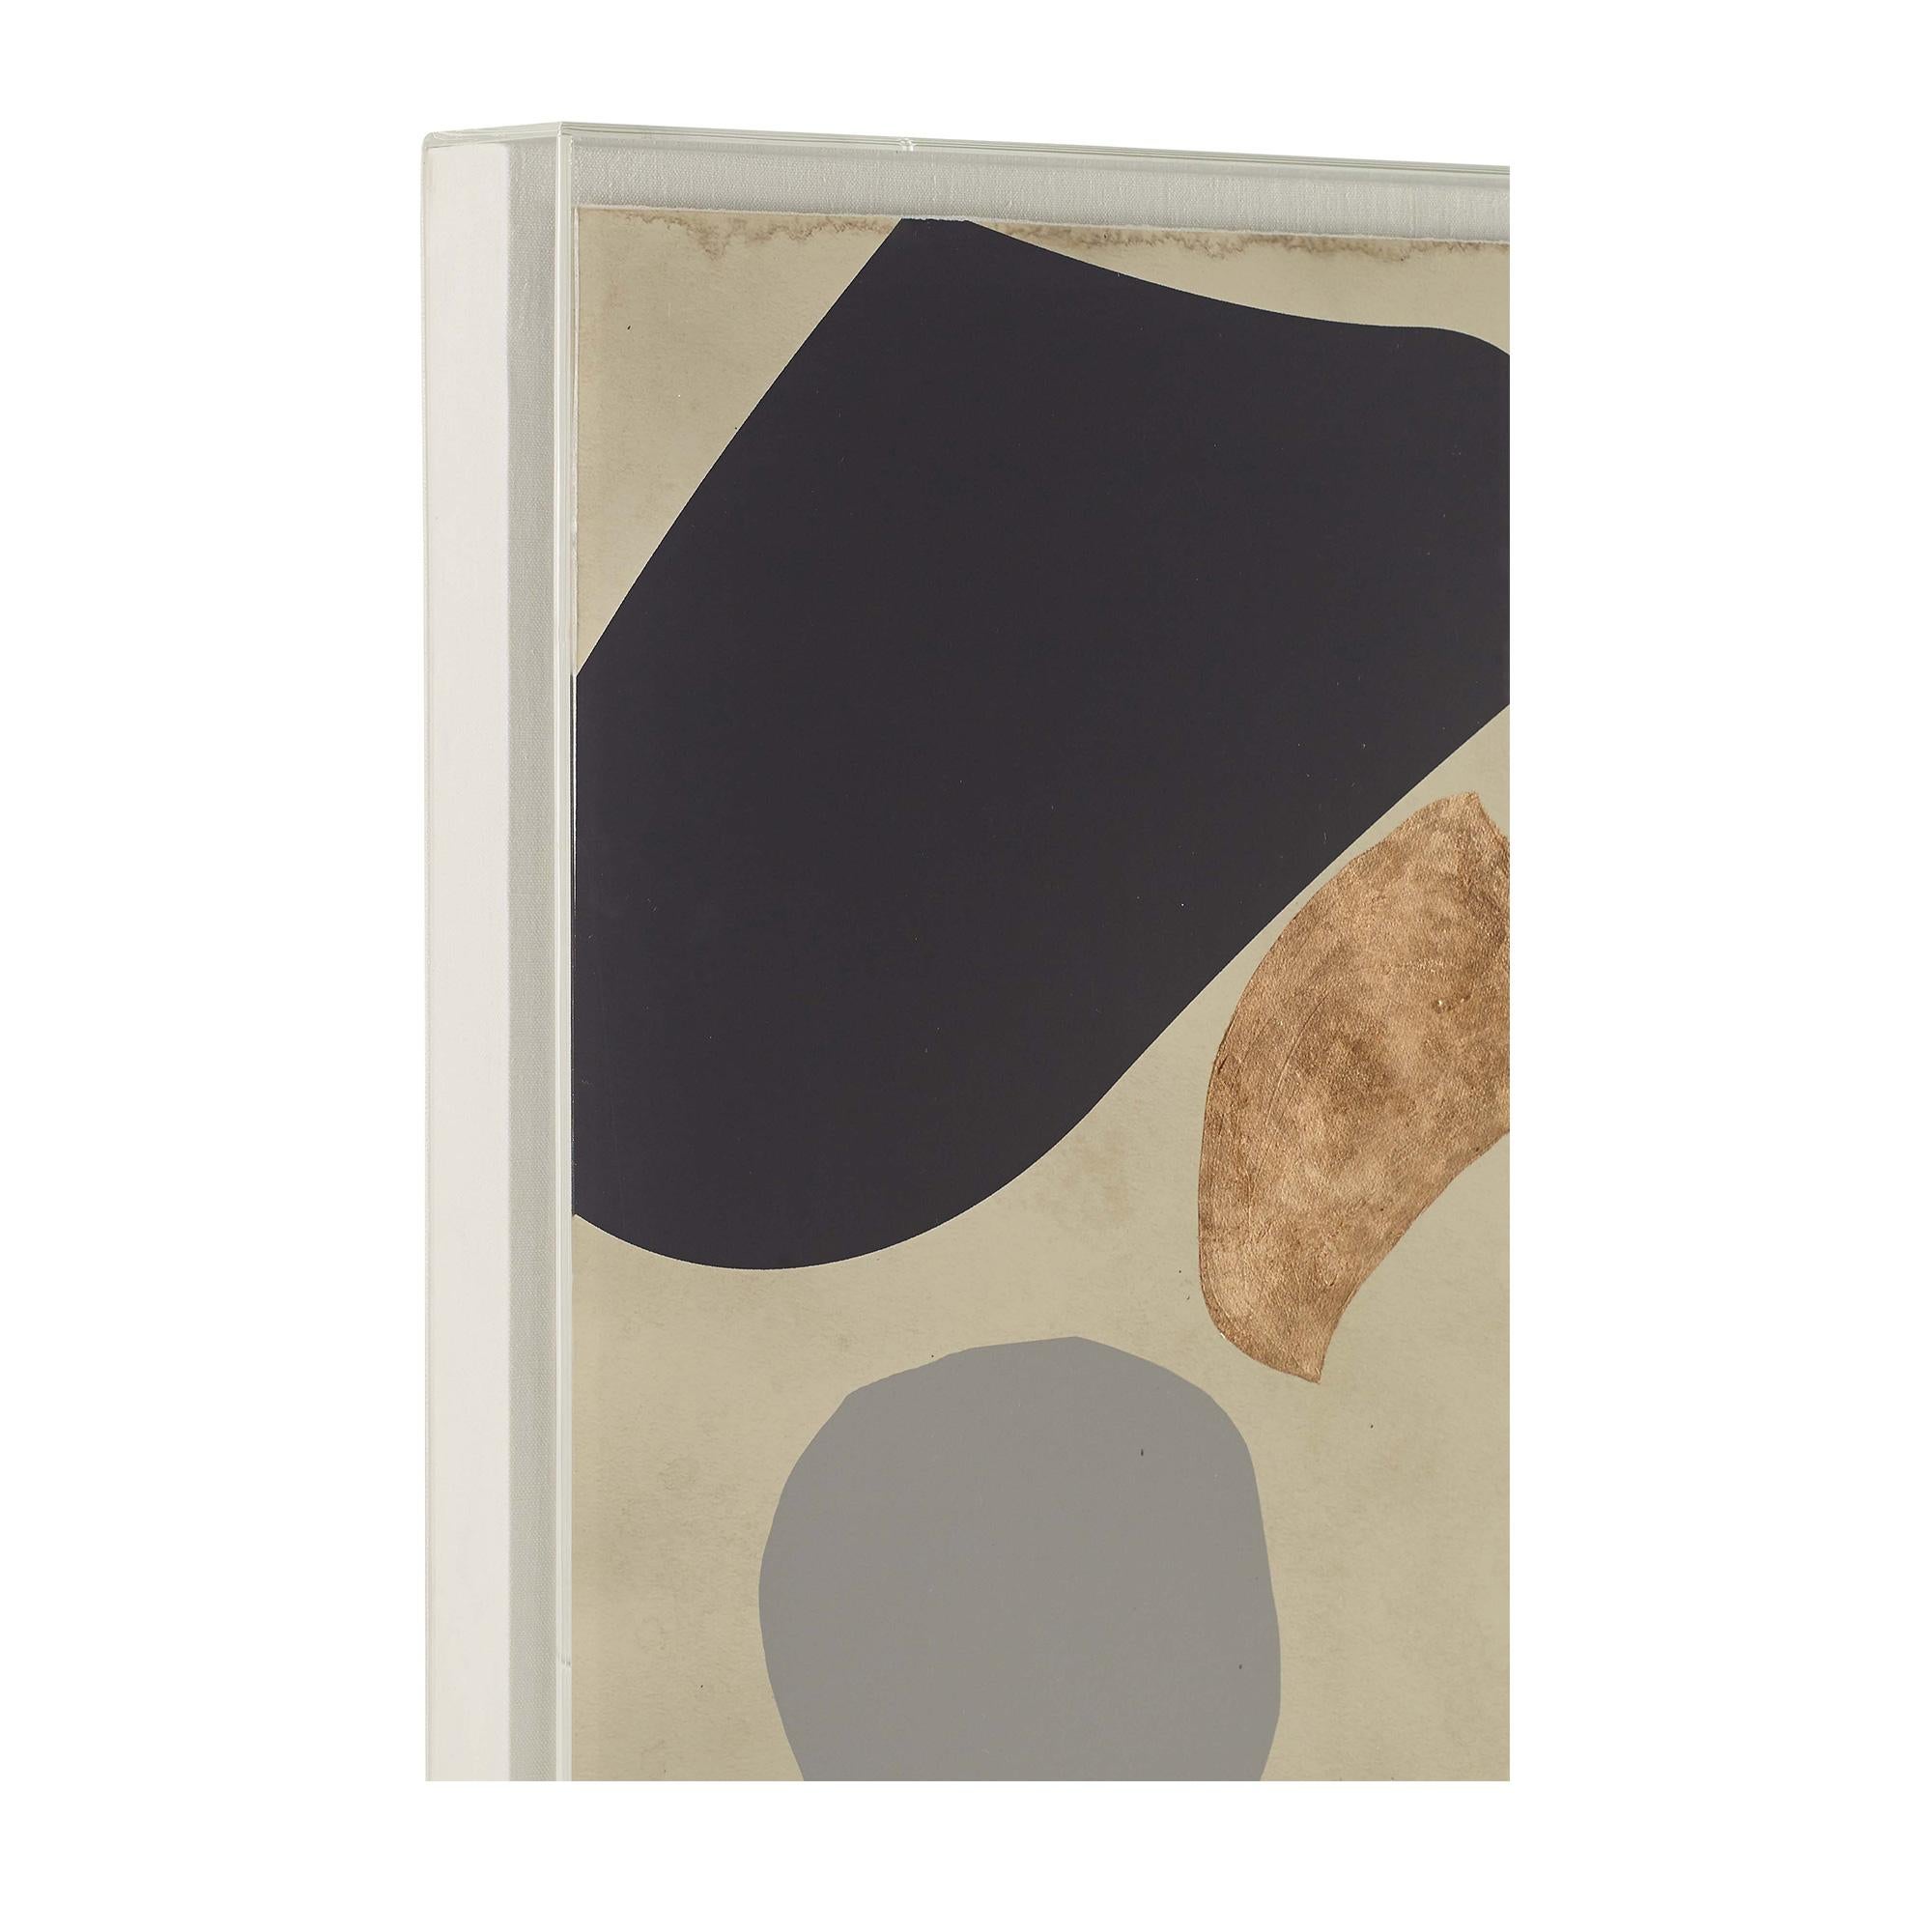 Free Float 1 is of a series of three modern abstract black, grey and metallic hand leafed giclee's printed on cotton archival watercolor paper with hand deckled edges. The art is then floated on linen and placed in an acrylic box. Made to order in